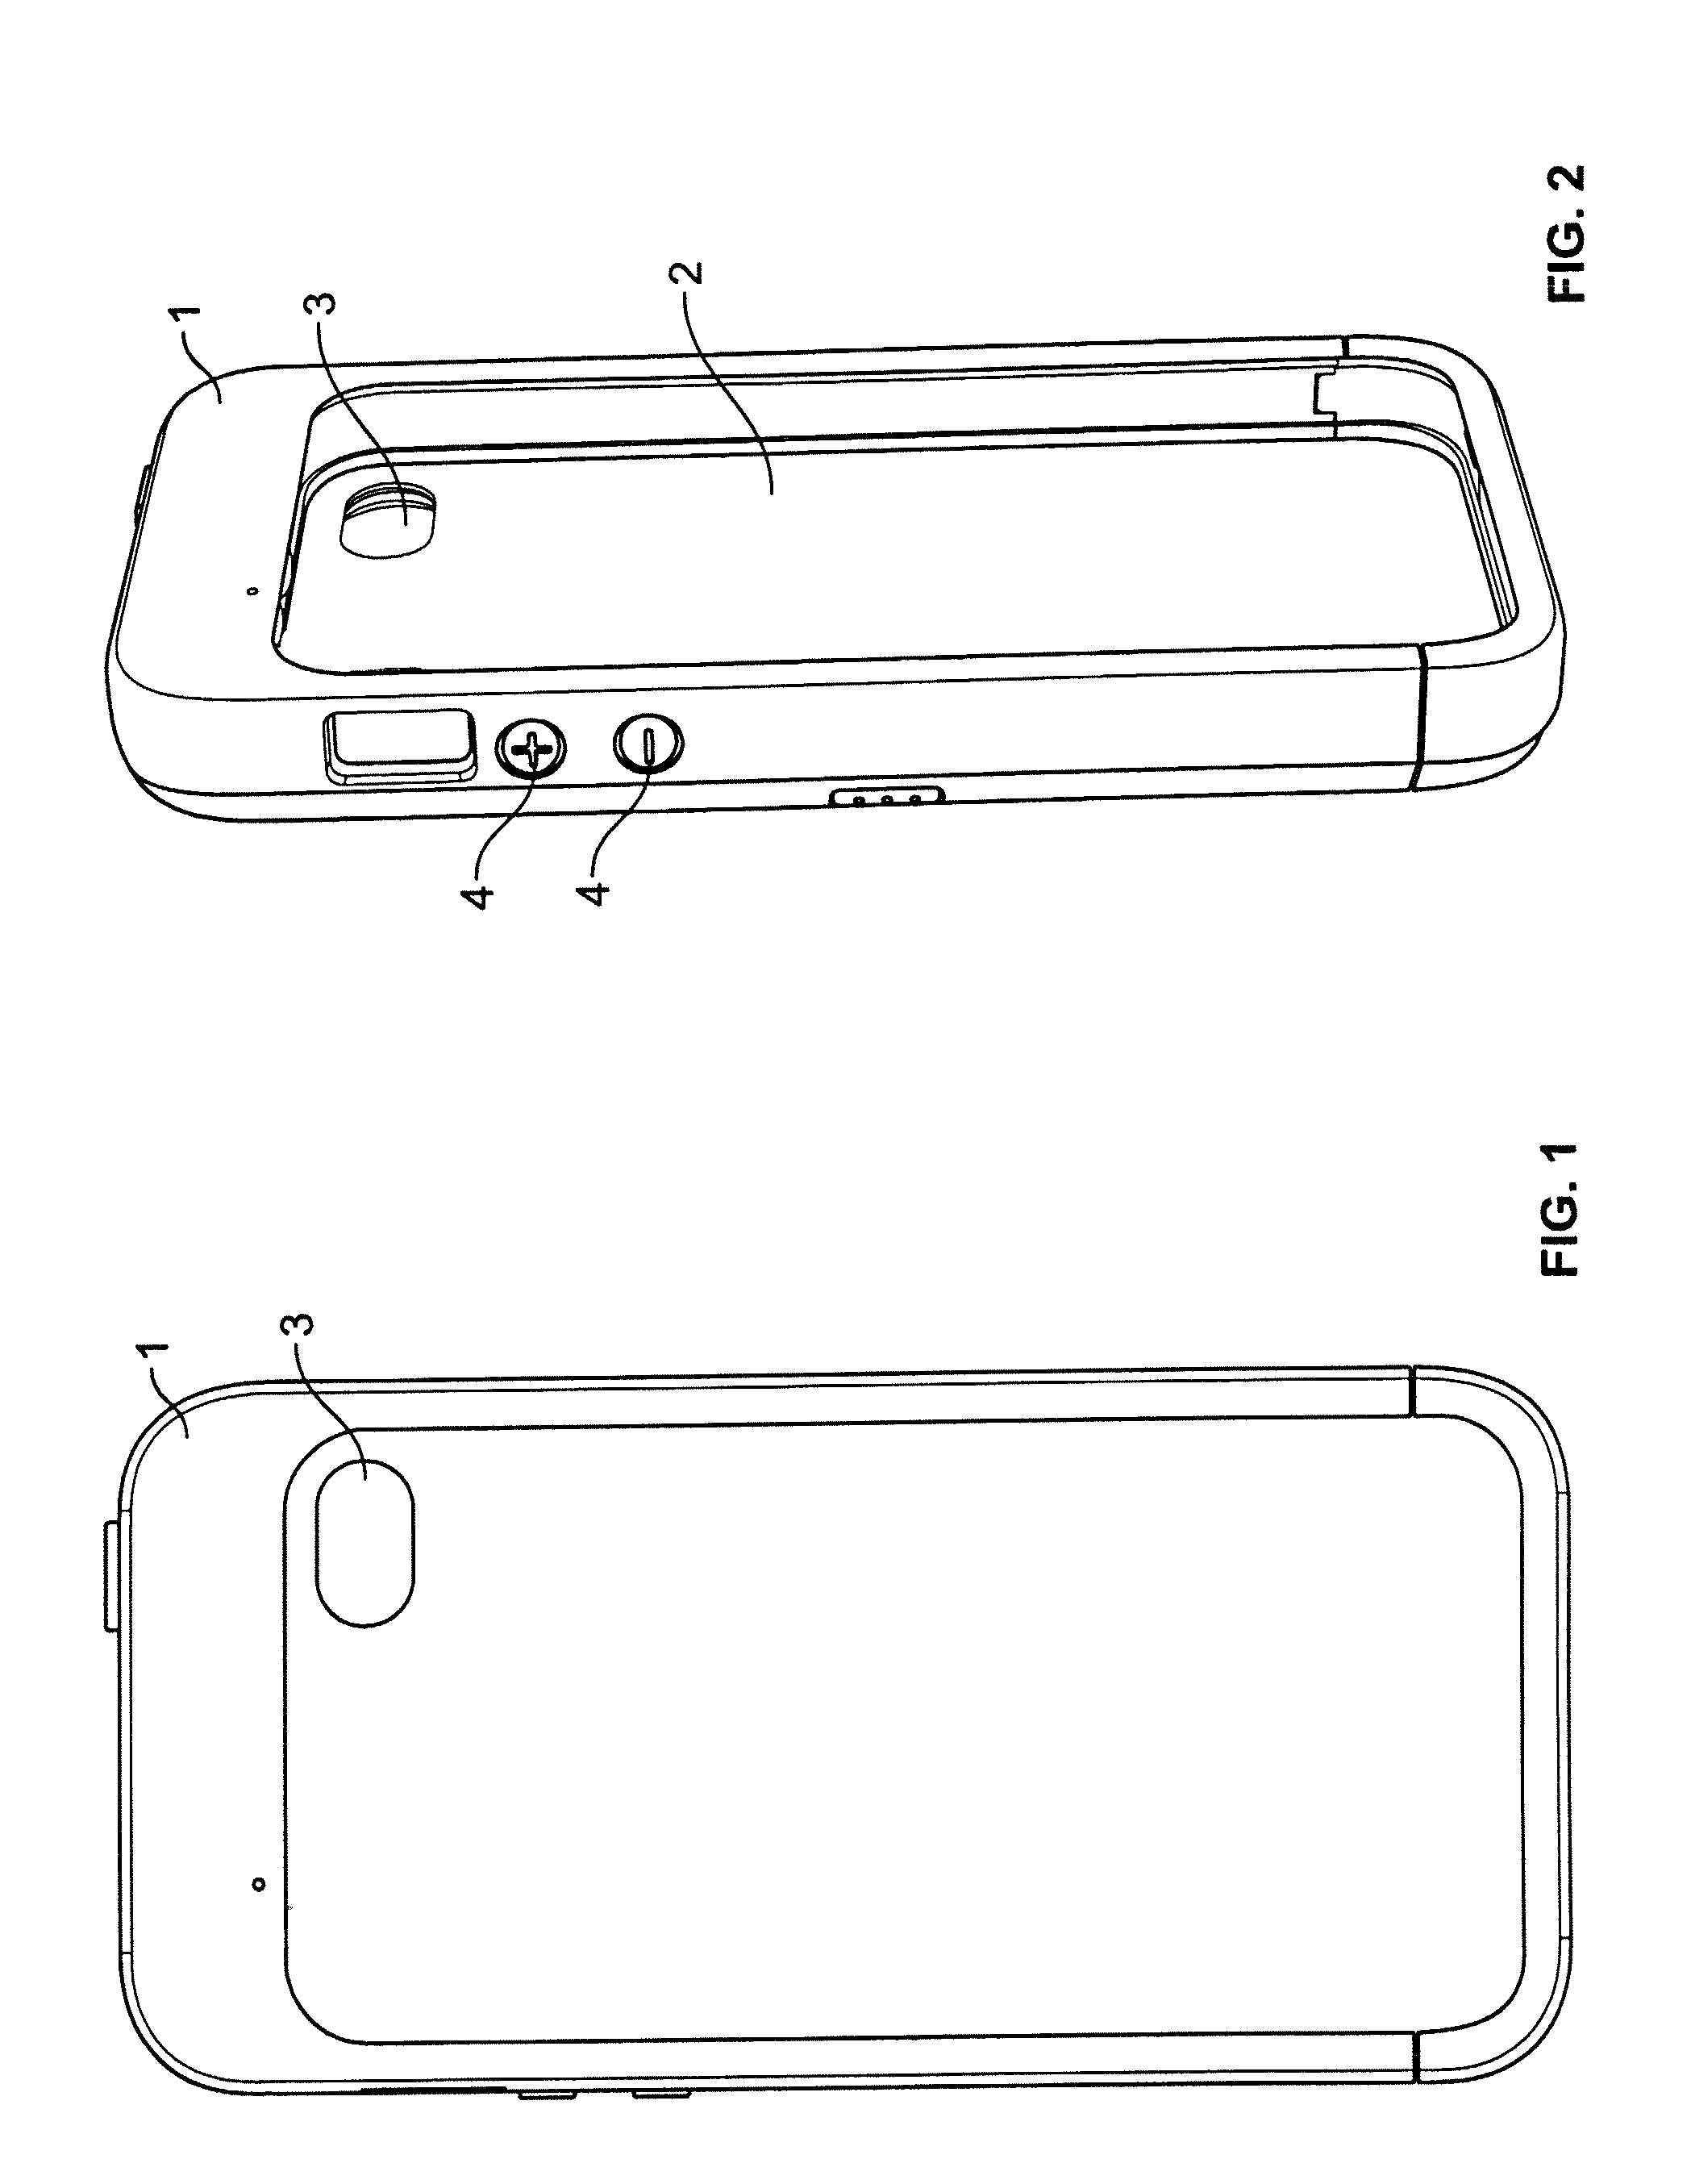 Health risk mitigating, retractable, wired headset and protective case platform for wireless communication devices